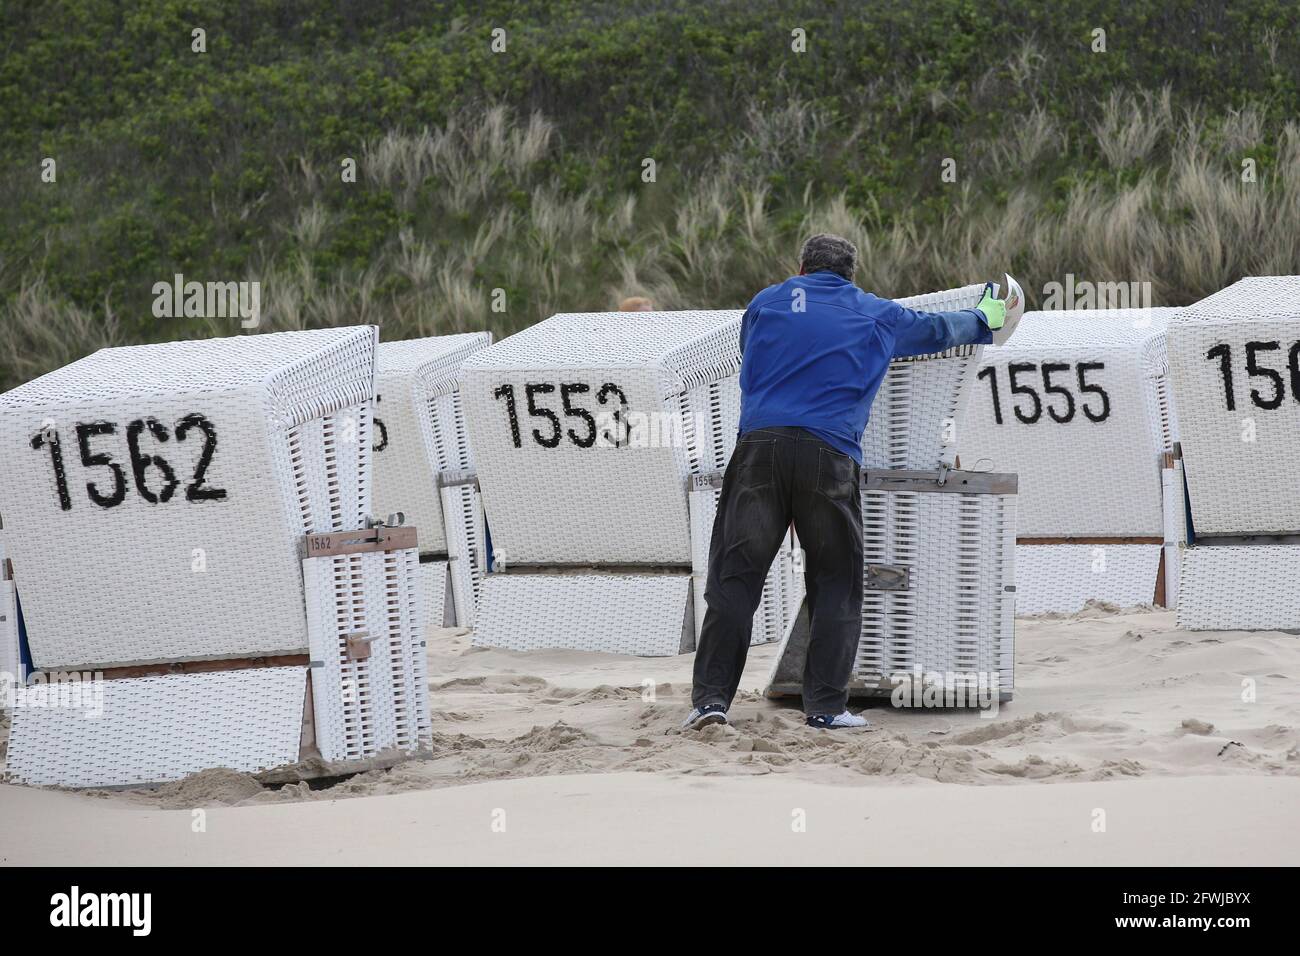 Westerland, Germany. 23rd May, 2021. An employee of the Sylt Tourism Service arranges rented beach chairs for a group. The tourist resorts in Schleswig-Holstein are well booked over the Whitsun weekend despite Corona-related restrictions and requirements. Credit: Bodo Marks/dpa/Alamy Live News Stock Photo